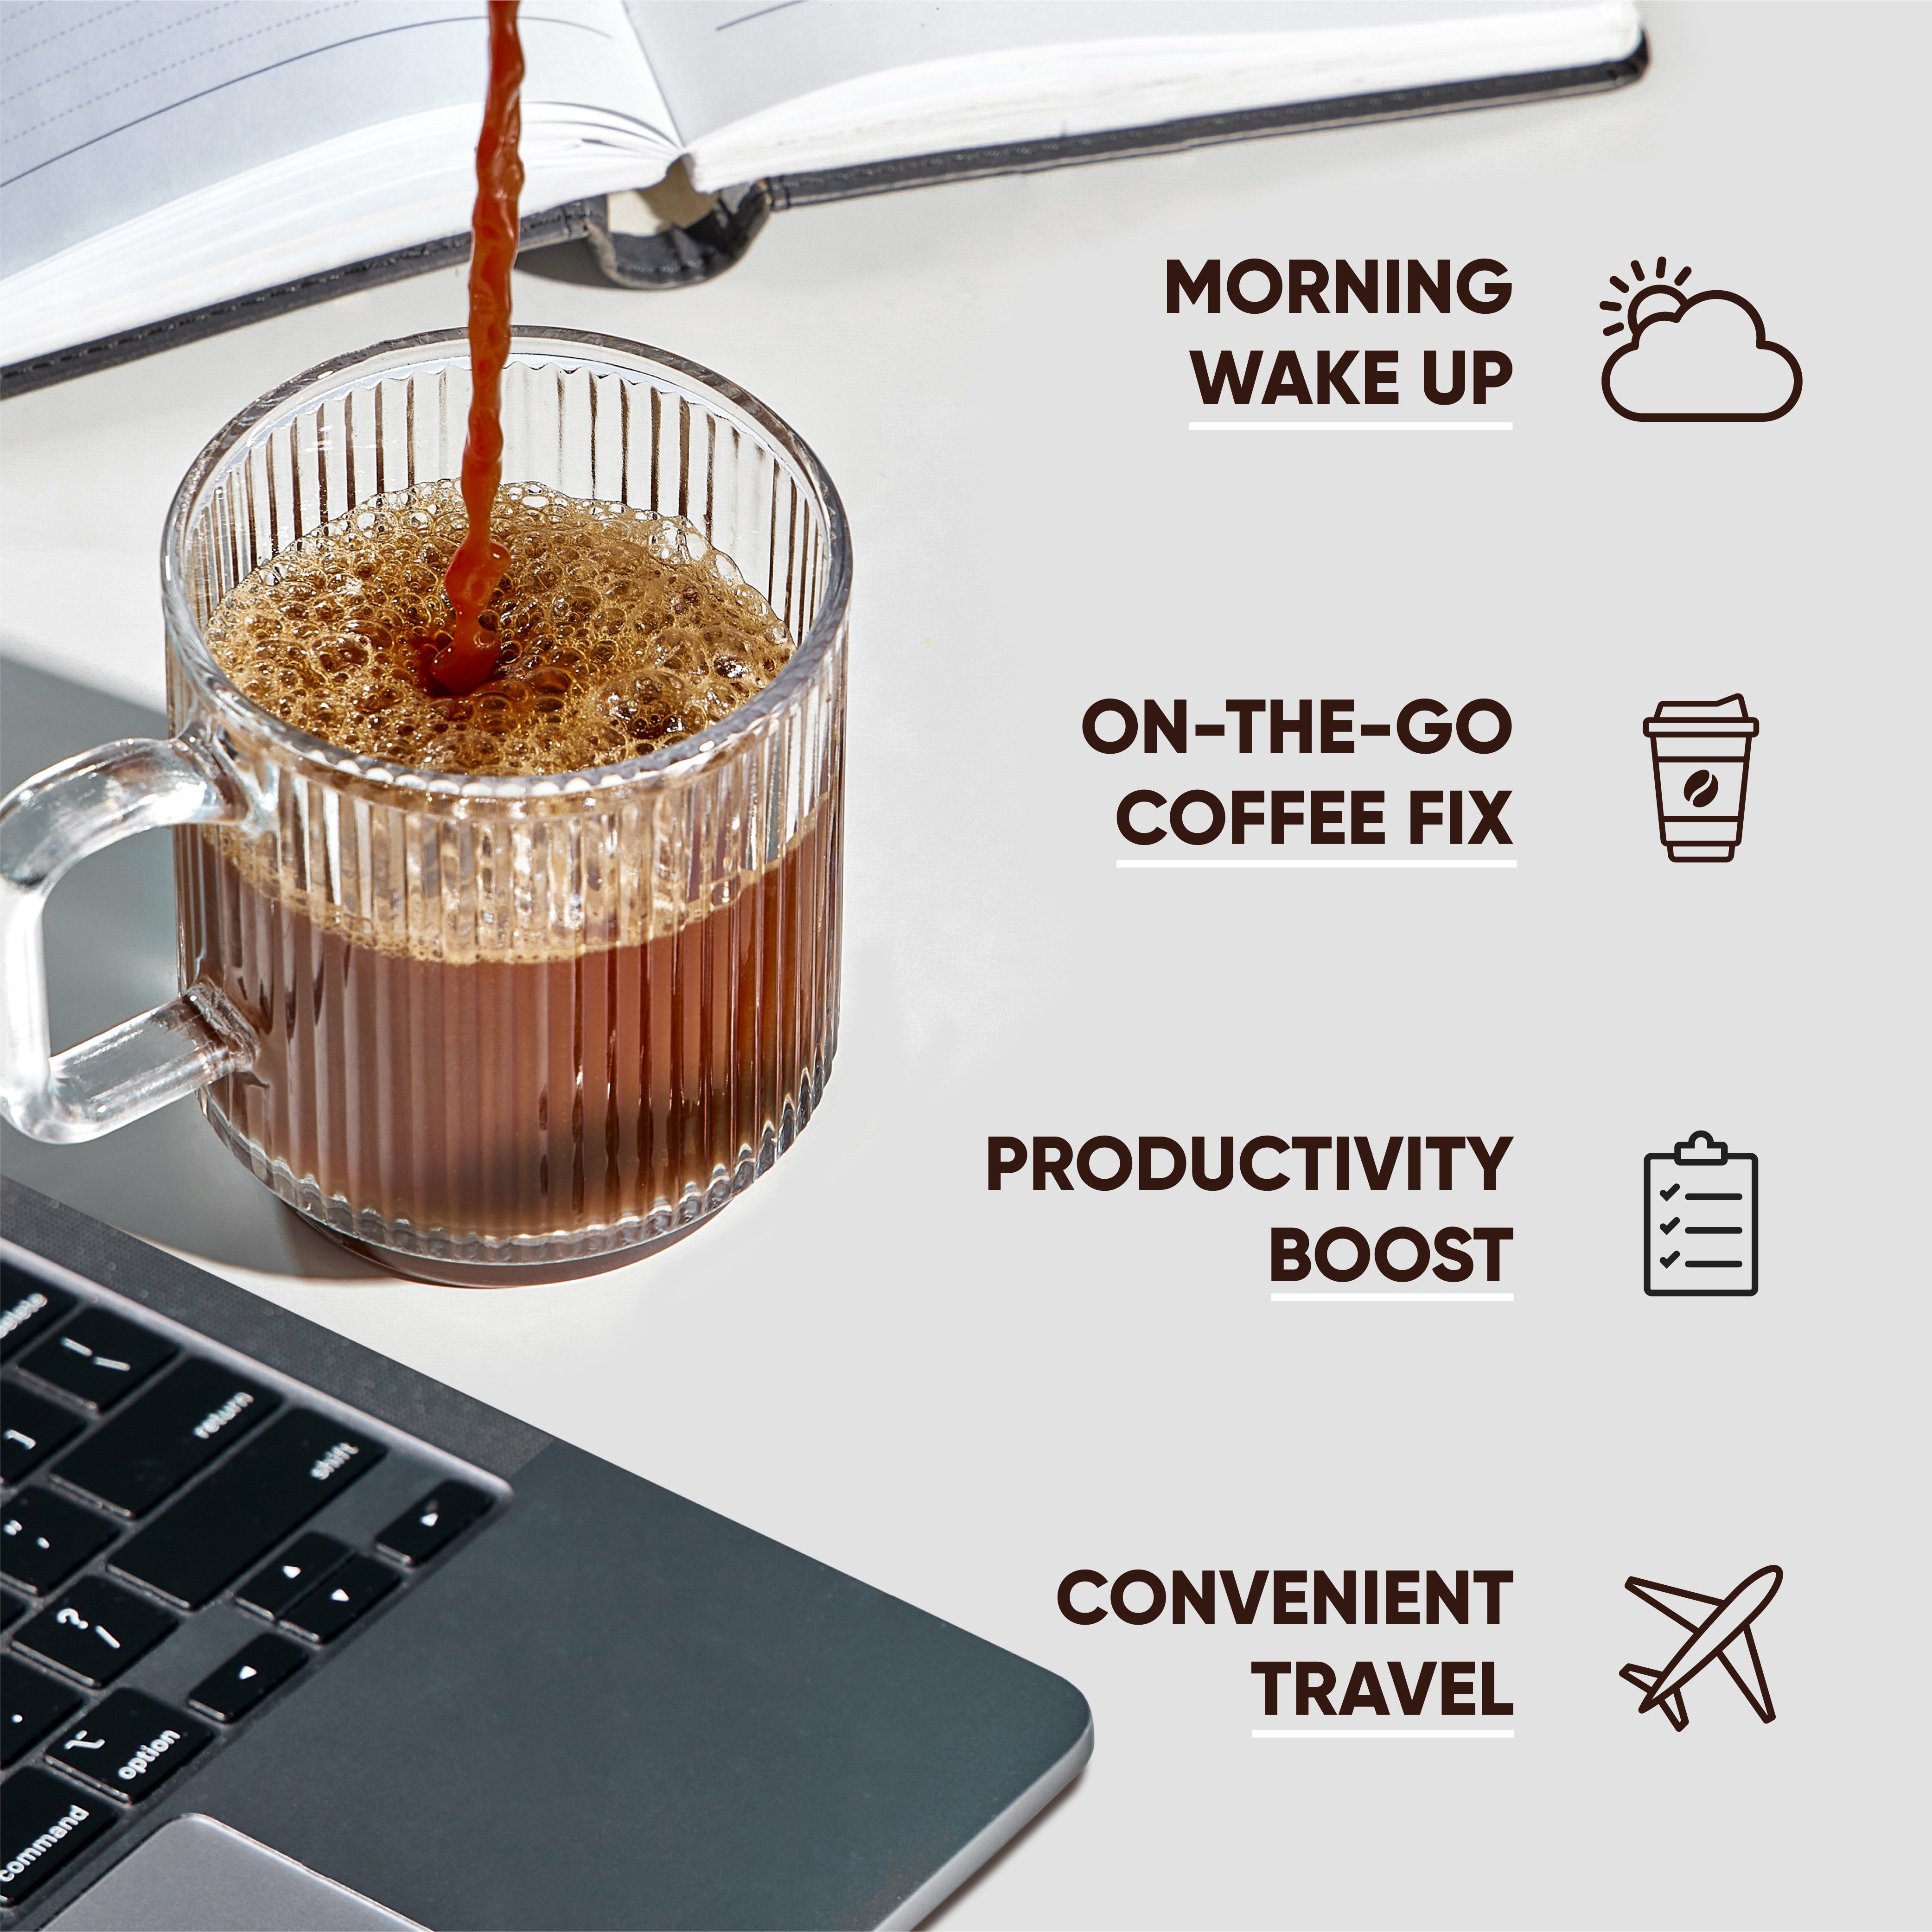 IQJOE Caffe Mocha Instant Coffee is great for: walking up in the morning, on-the-go coffee, productivity boost, convenient travel.